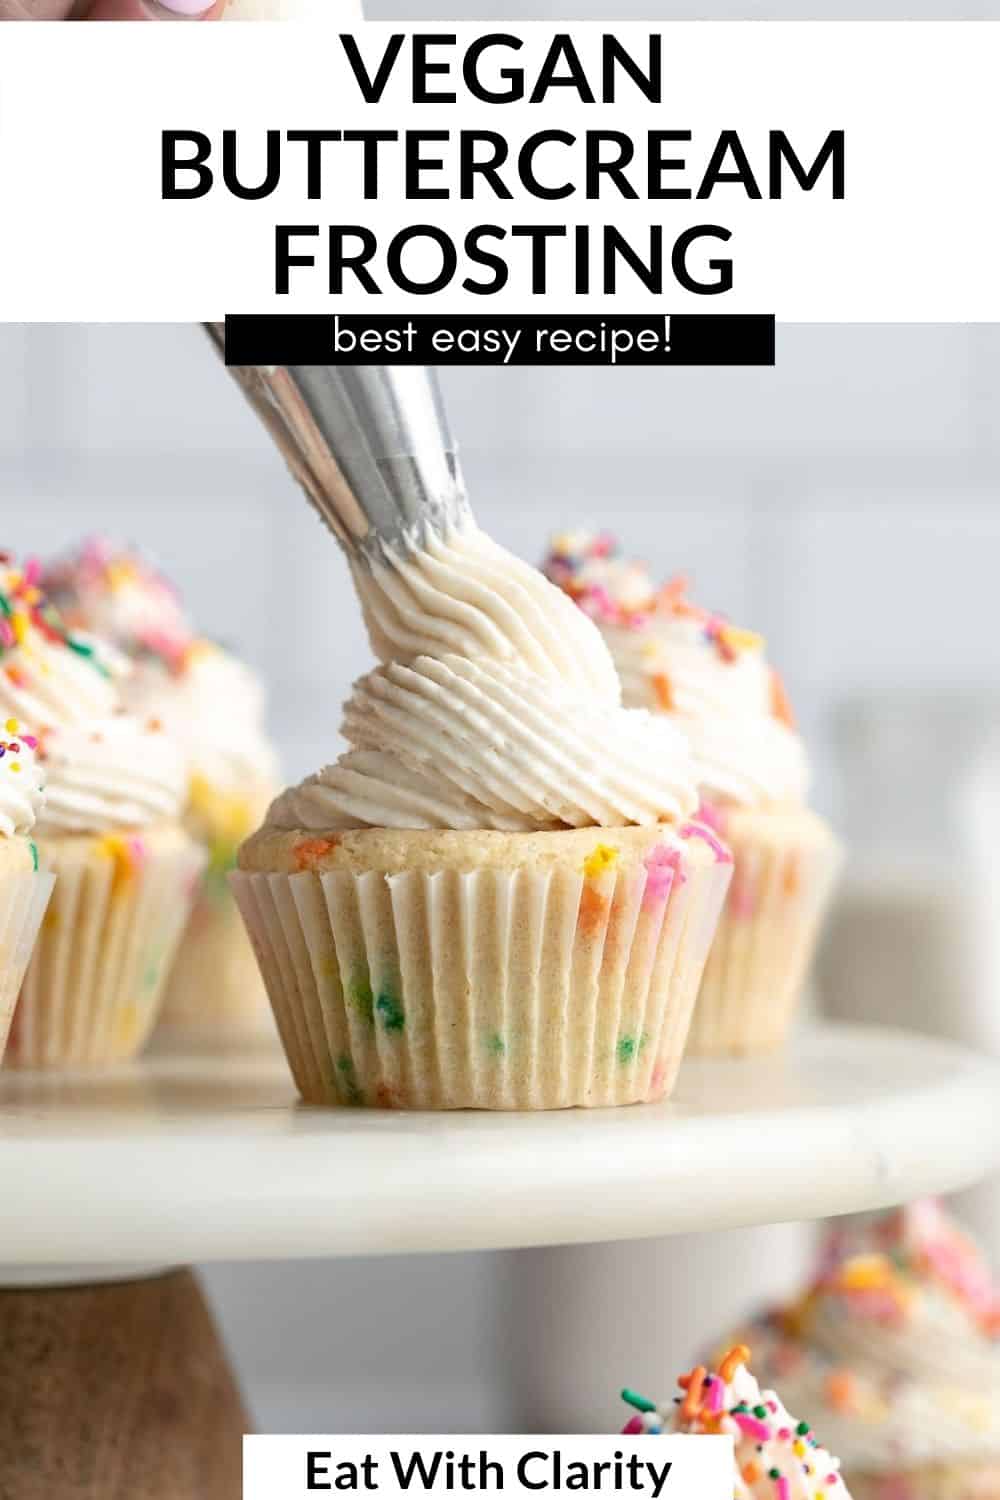 Classic Vegan Buttercream Frosting | Eat With Clarity